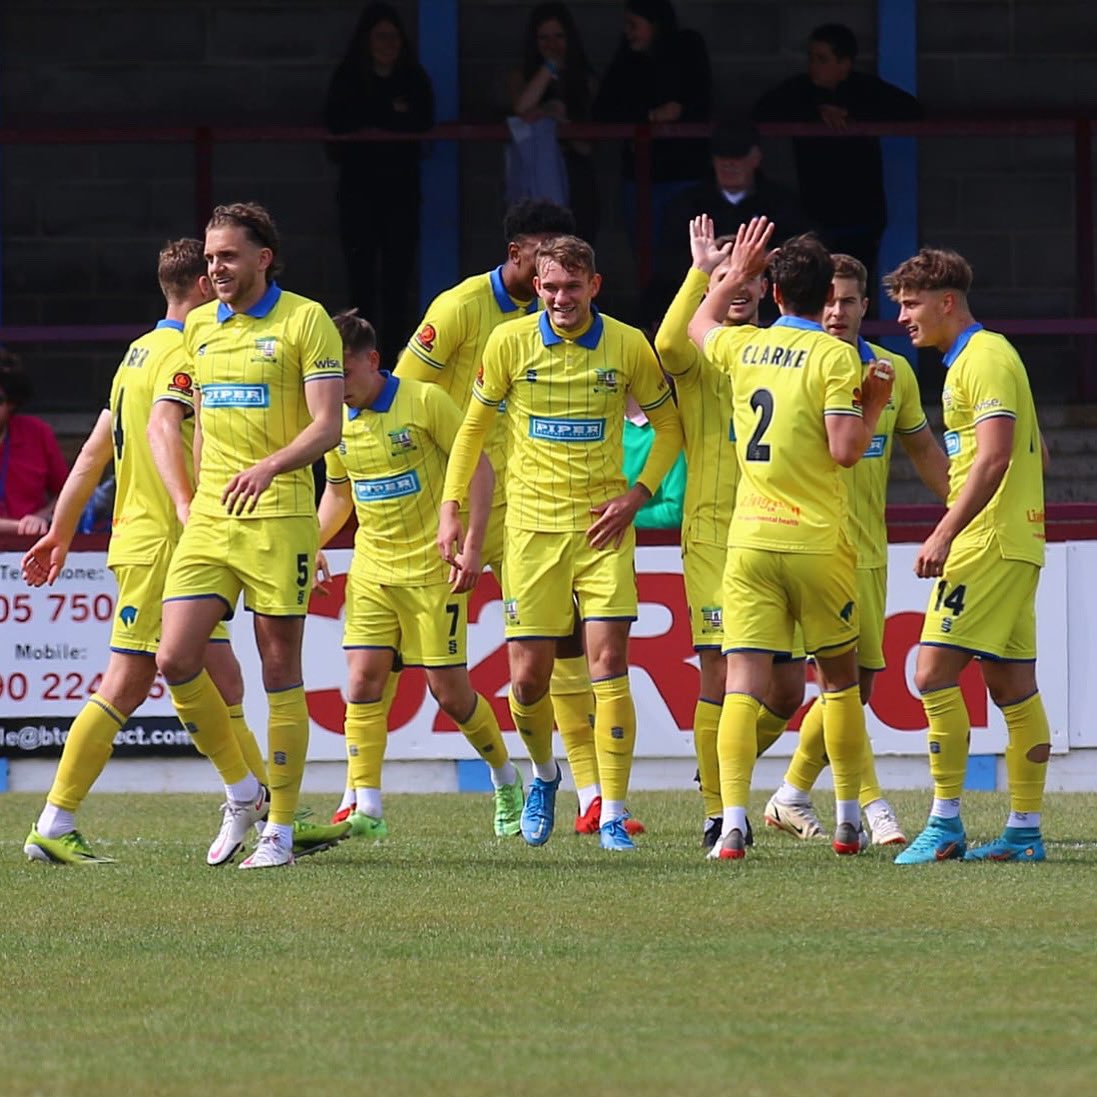 Weymouth FC 2-4 Solihull Moors: Back To Back Wins As The Moors Chase Third